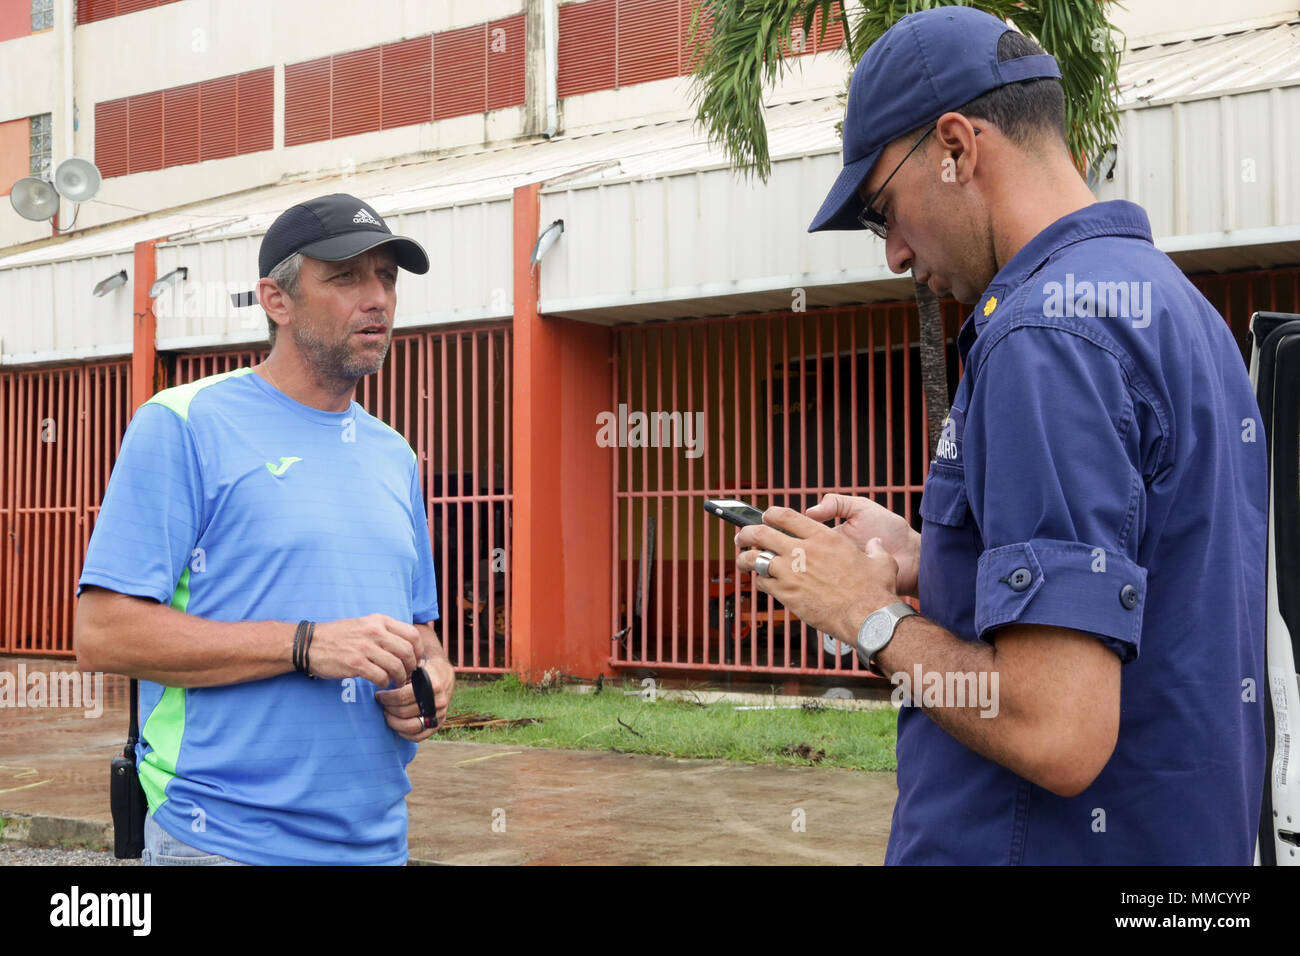 U.S. Coast Guard Lt. Cdr. Jose M. Roasario Carpio (right), FEMA Intergovernmental, Affairs Division 9 Supervisor, speaks with the Mayor of Coamo Juan Carlos Garcia Padilla on how he can help with the city in Coamo, Puerto Rico, Oct. 16, 2017. Rosario was sent by FEMA to make sure grocery stores throughout the city were stocked, and the locals are receiving basic needs from the Mayor. (U.S. Army photo by Pfc. Kyara Aguilar) Stock Photo